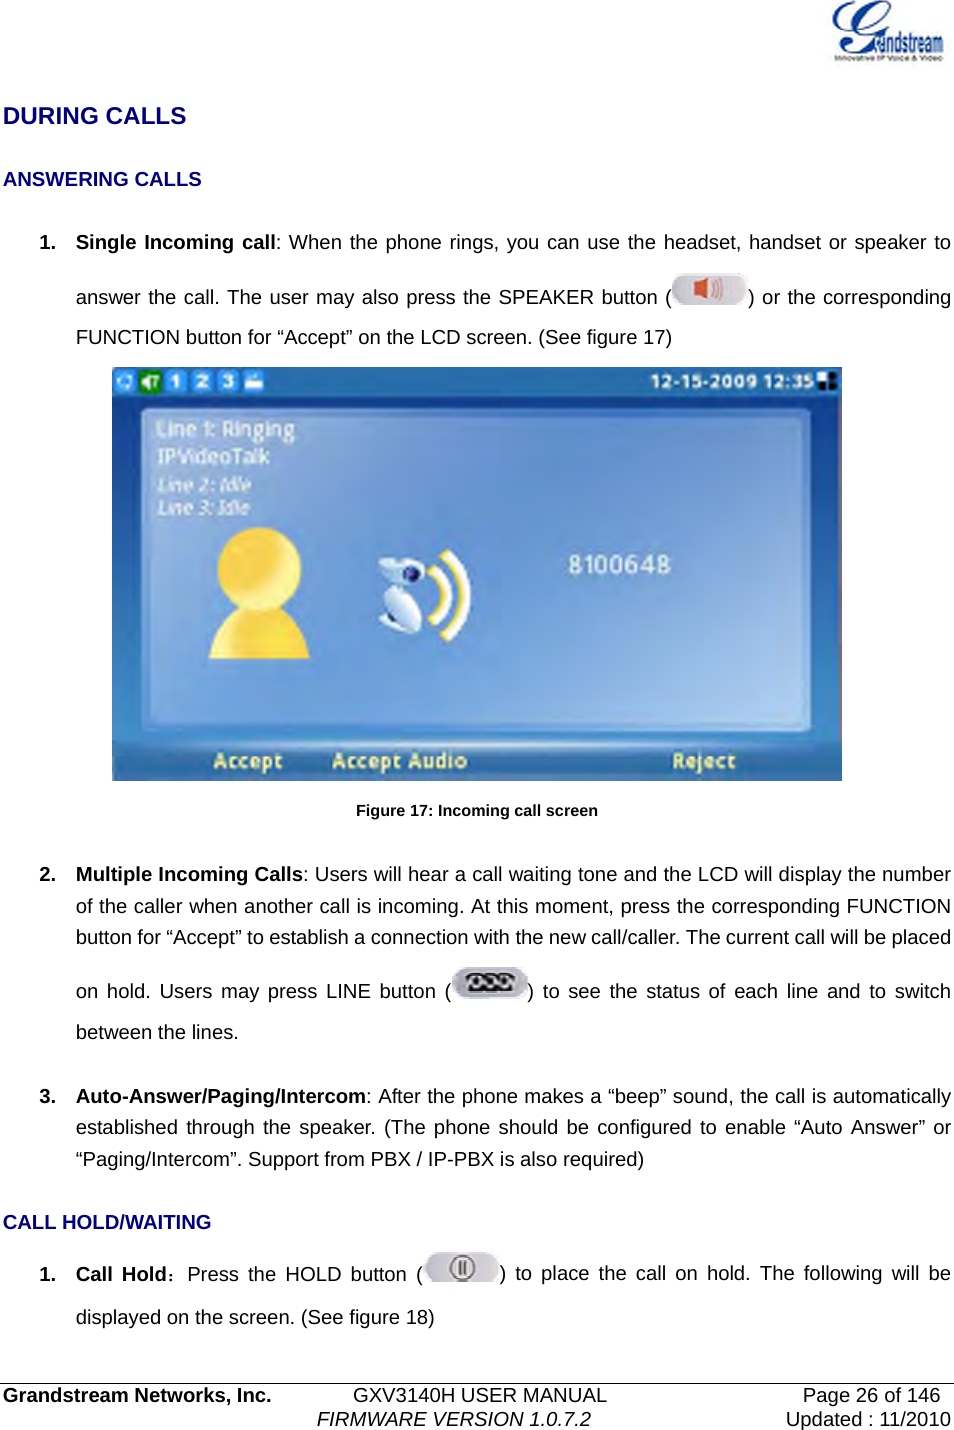   Grandstream Networks, Inc.        GXV3140H USER MANUAL                  Page 26 of 146                                FIRMWARE VERSION 1.0.7.2 Updated : 11/2010   DURING CALLS  ANSWERING CALLS  1.  Single Incoming call: When the phone rings, you can use the headset, handset or speaker to answer the call. The user may also press the SPEAKER button ( ) or the corresponding FUNCTION button for “Accept” on the LCD screen. (See figure 17)    Figure 17: Incoming call screen  2.  Multiple Incoming Calls: Users will hear a call waiting tone and the LCD will display the number of the caller when another call is incoming. At this moment, press the corresponding FUNCTION button for “Accept” to establish a connection with the new call/caller. The current call will be placed on hold. Users may press LINE button ( ) to see the status of each line and to switch between the lines.  3. Auto-Answer/Paging/Intercom: After the phone makes a “beep” sound, the call is automatically established through the speaker. (The phone should be configured to enable “Auto Answer” or “Paging/Intercom”. Support from PBX / IP-PBX is also required)  CALL HOLD/WAITING 1. Call Hold：Press the HOLD button ( ) to place the call on hold. The following will be displayed on the screen. (See figure 18)   